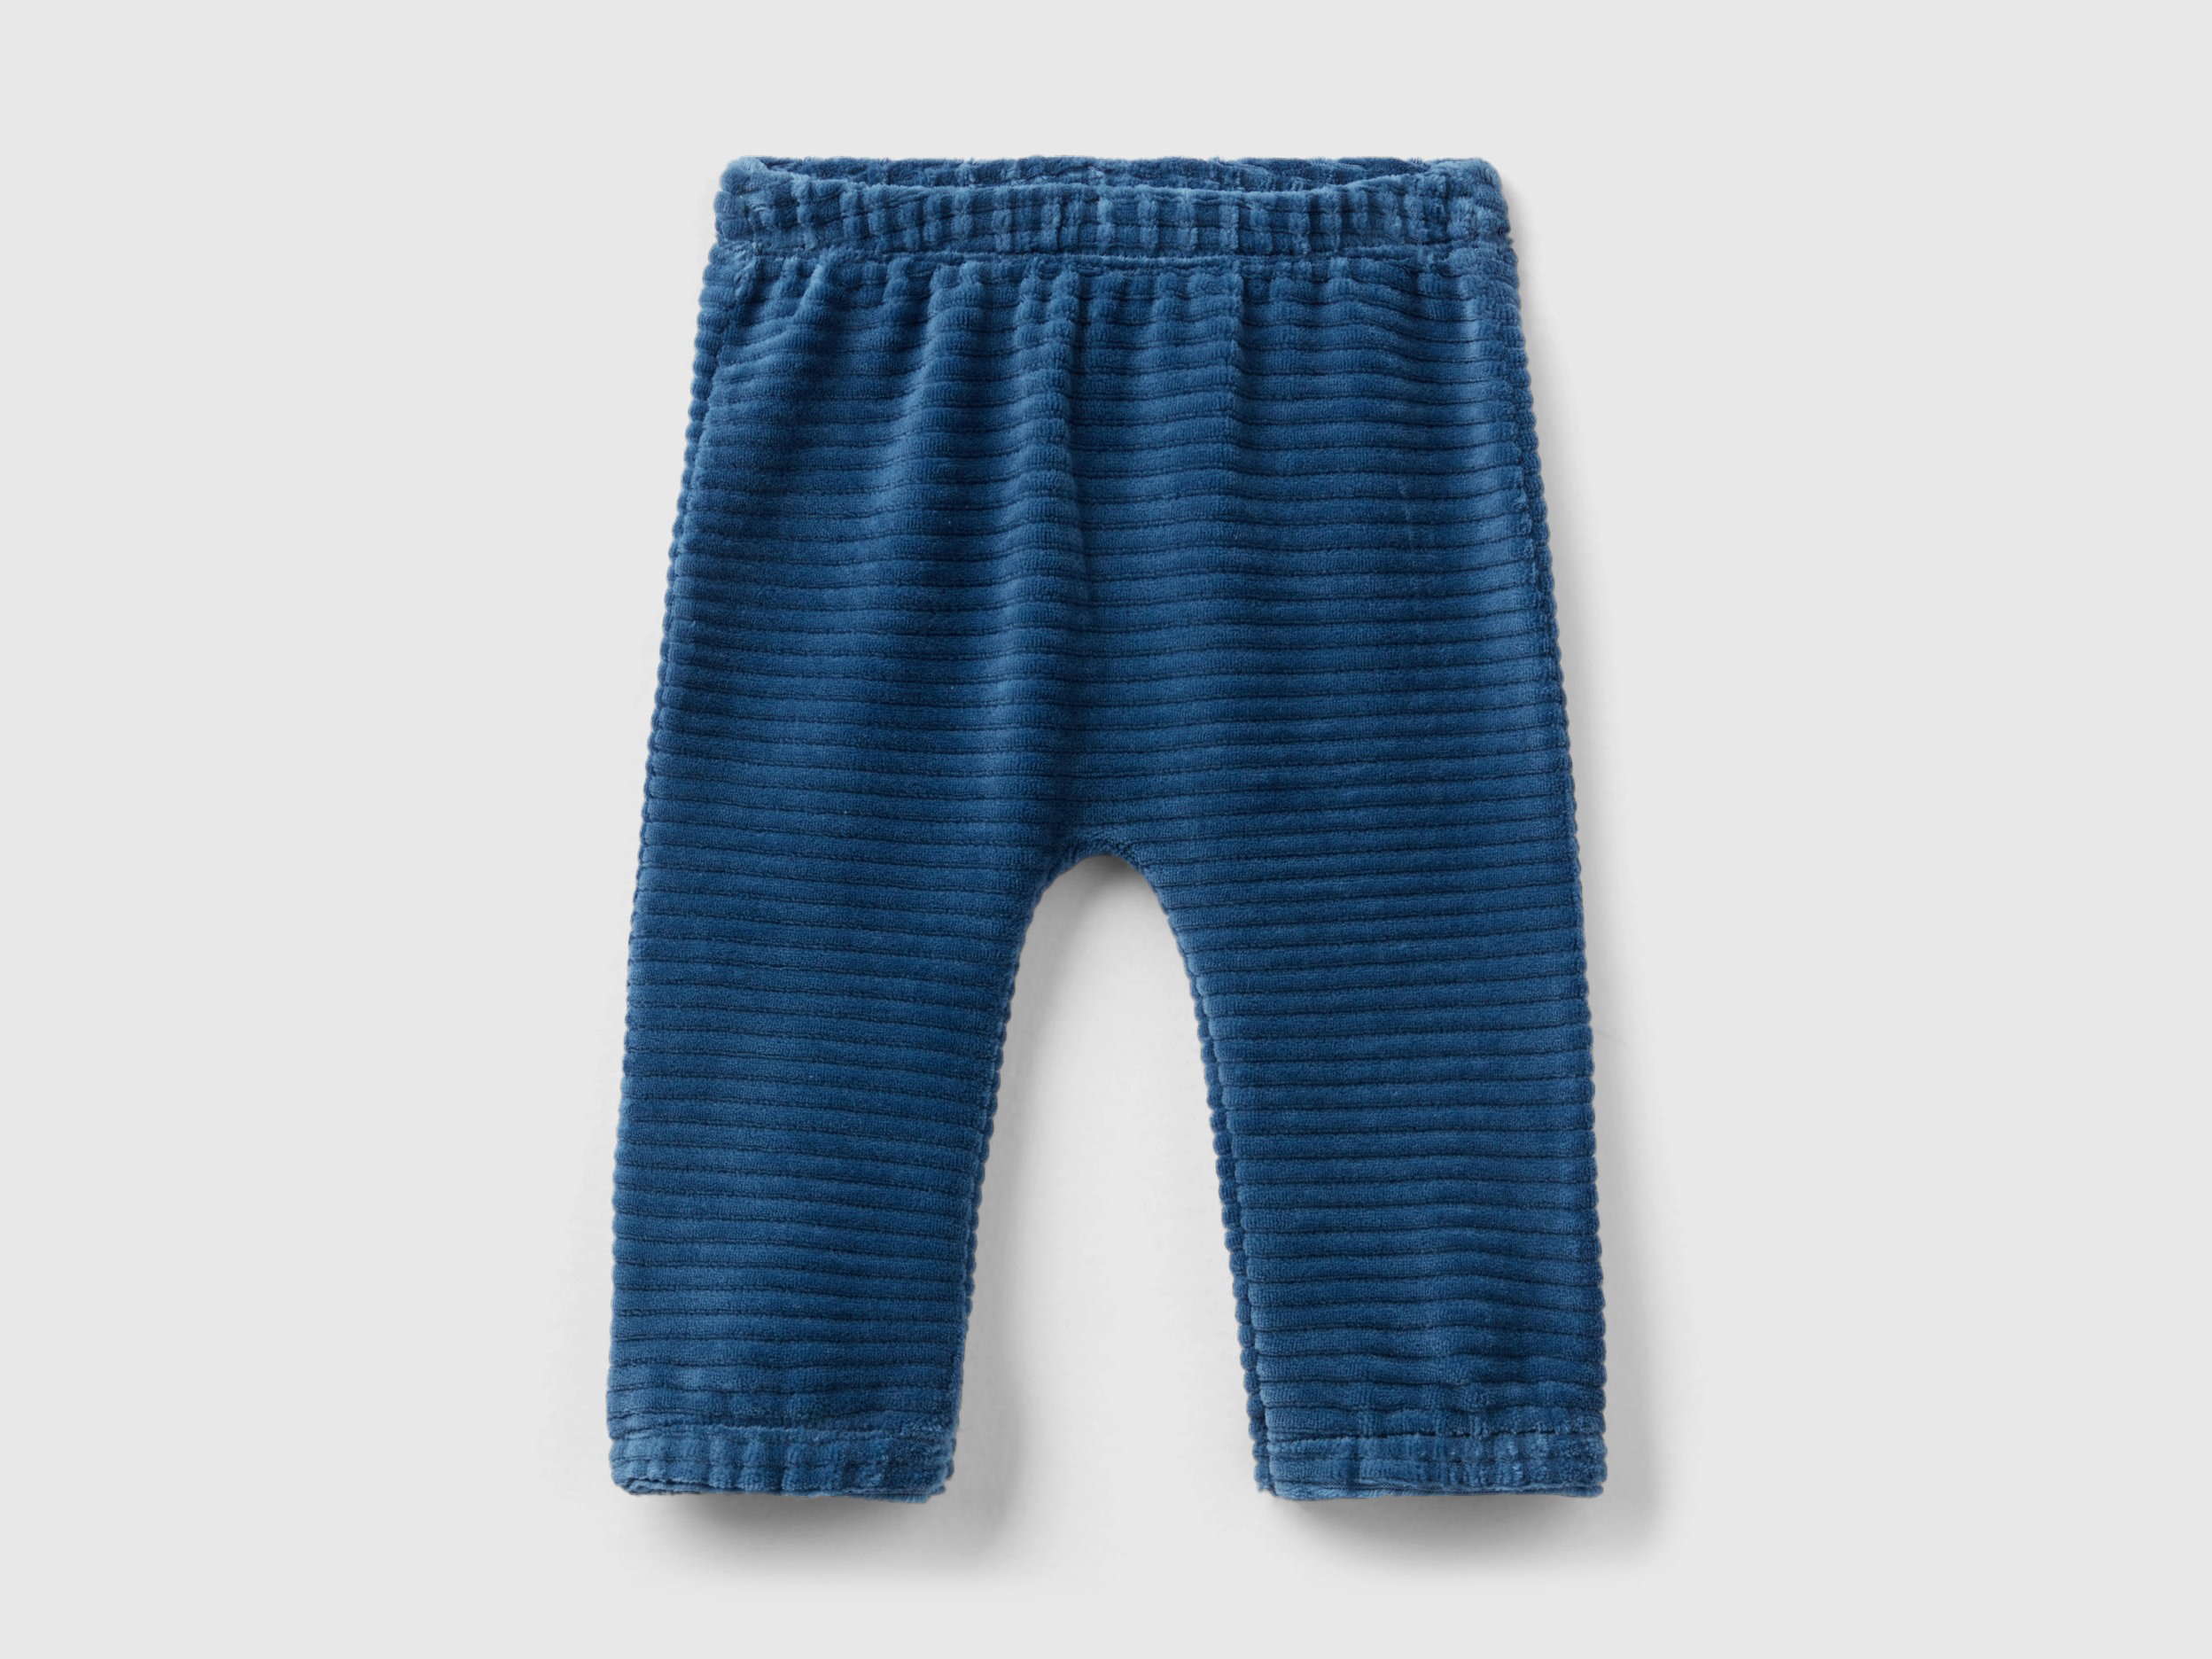 Benetton, Chenille Trousers With Embroidery, size 1-3, Blue, Kids